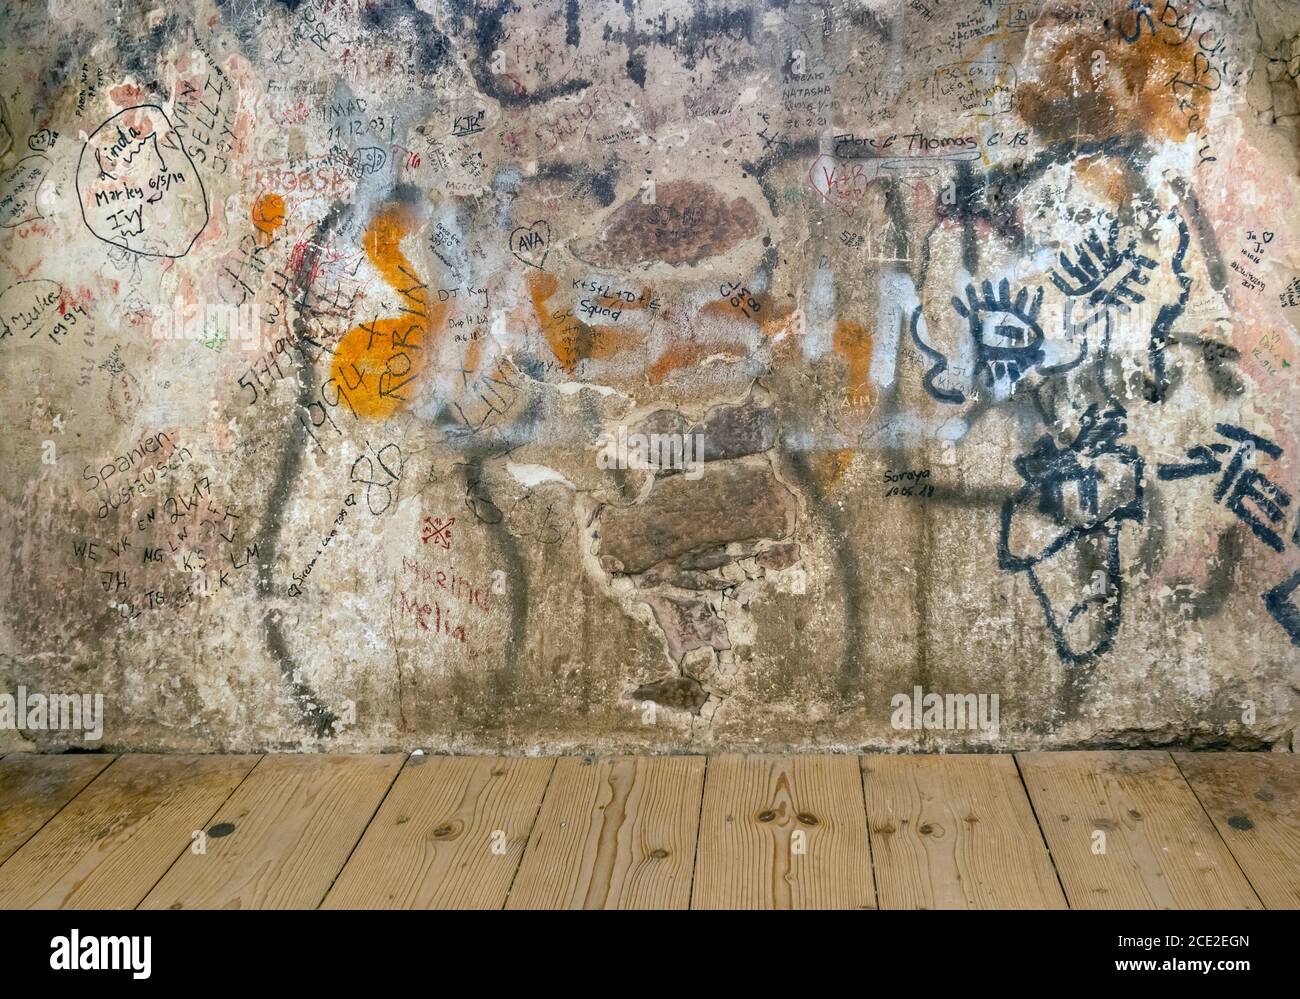 historic wall covered with lots of graffiti tags Stock Photo